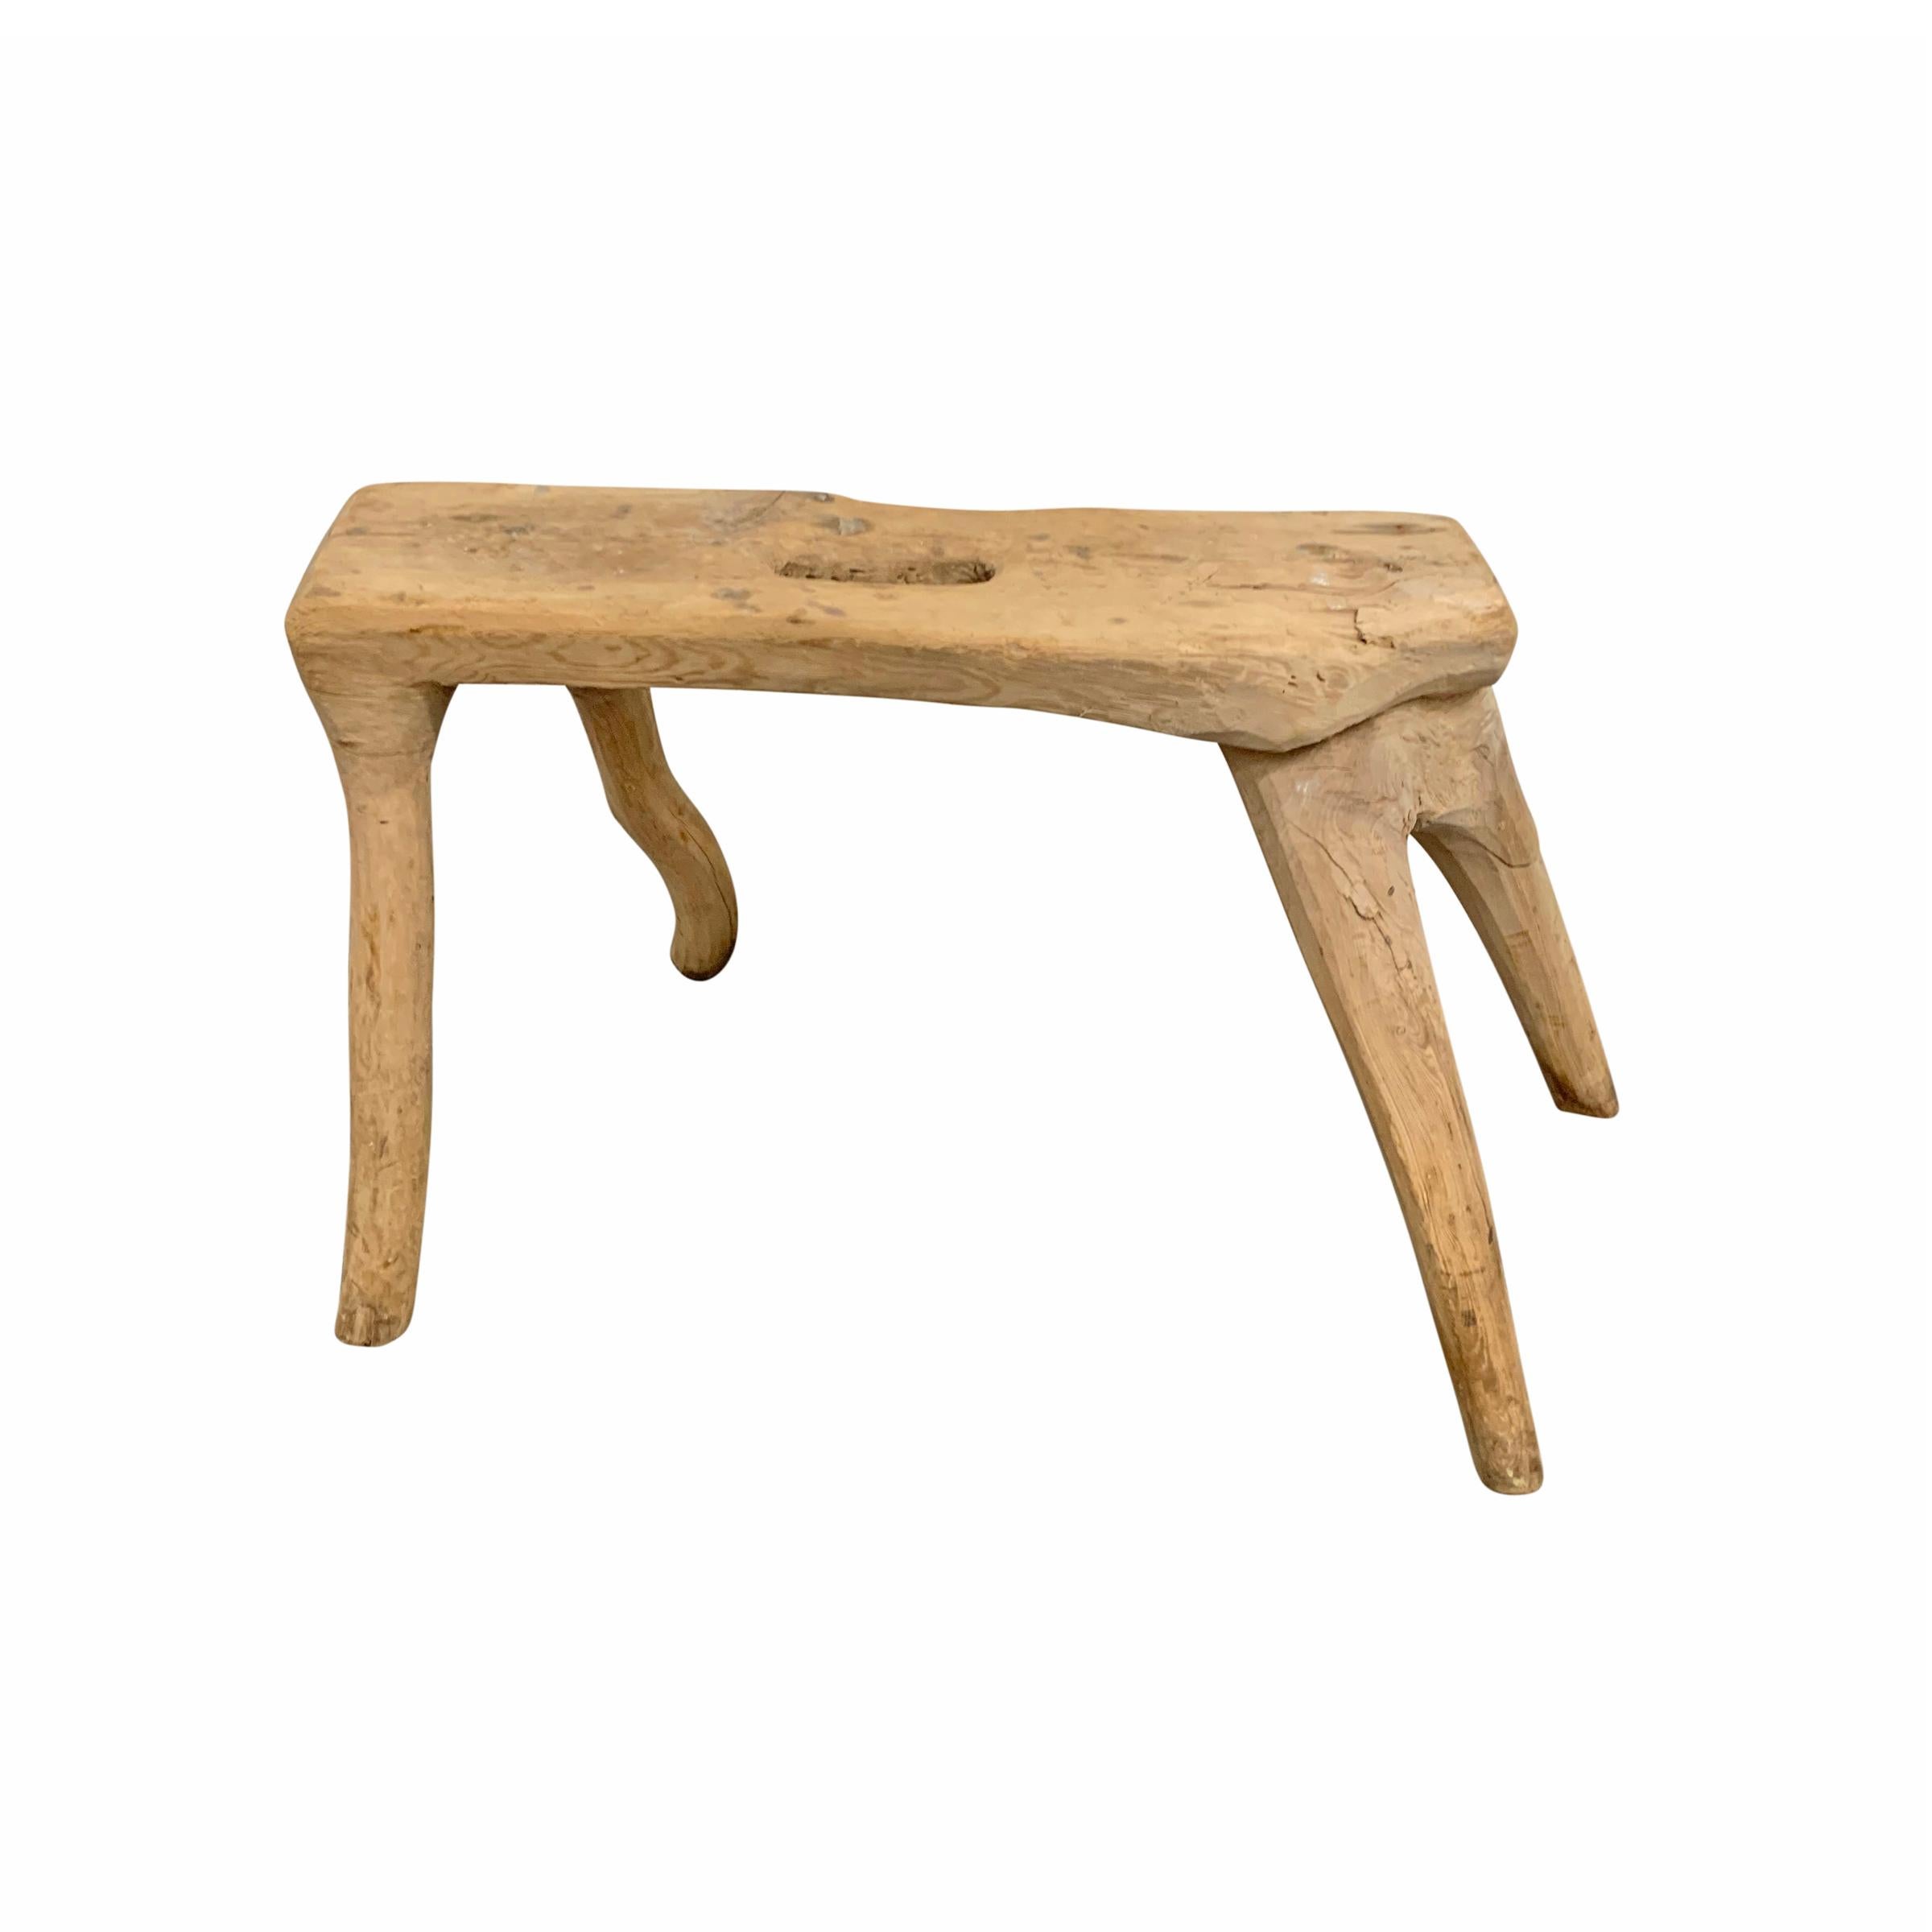 A fanciful and sculptural 19th century Swedish Primitive pine root-wood stool with four splayed legs and a hole cut into the seat used for carrying.